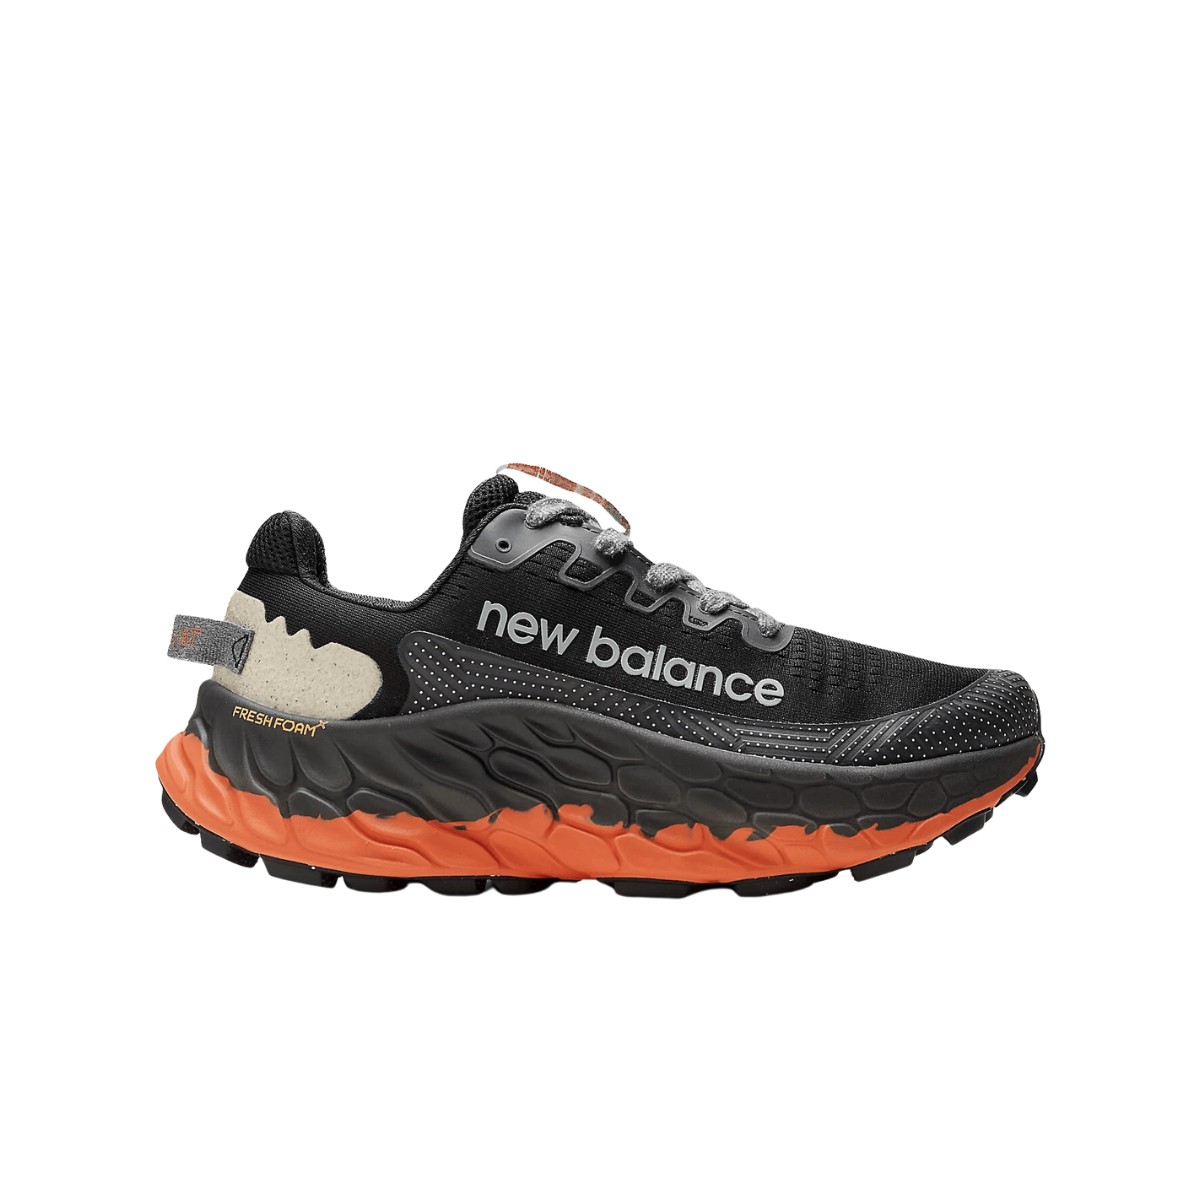 Chaussures New Balance Fresh Foam X More Trail v3 Noir Orange AW23, Taille 45,5 - EUR product